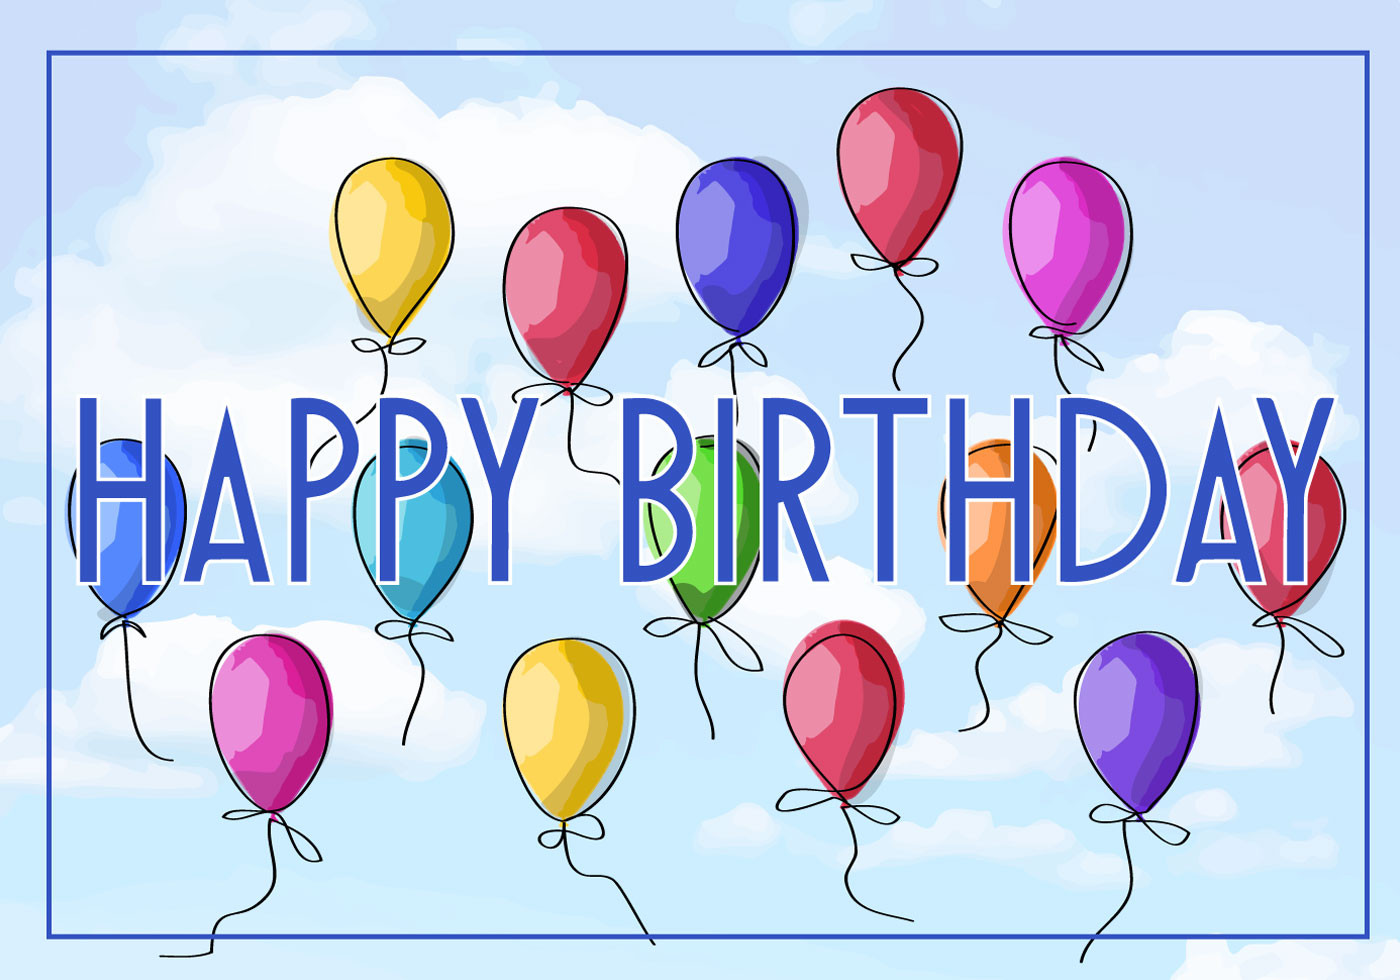 Free Download Birthday Cards
 Free Vector Illustration of a Happy Birthday Greeting Card